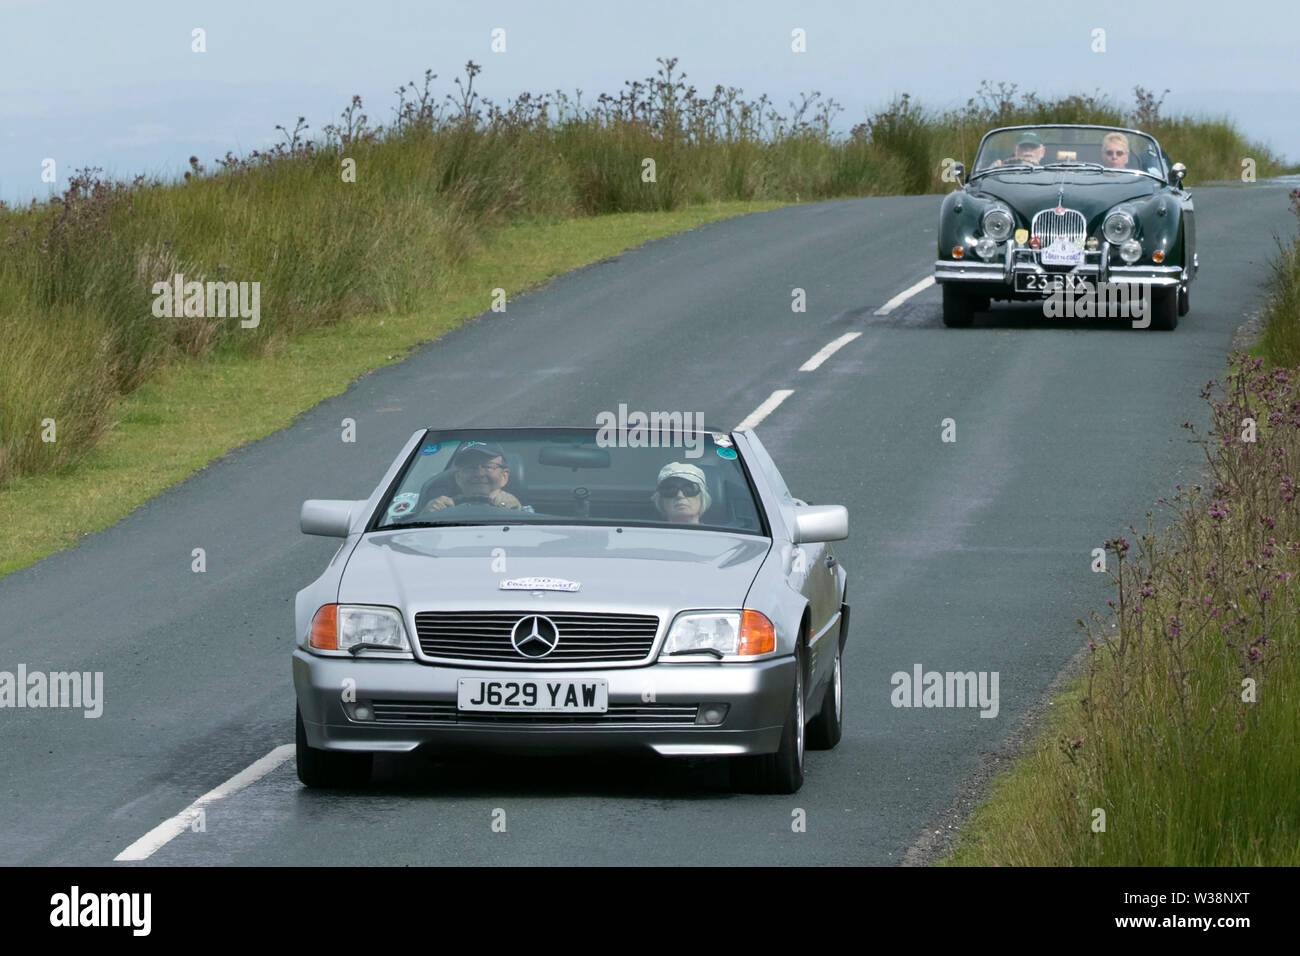 1992 90s nineties, Mercedes Benz 300Sl-24 Auto 300SL Catalytic Converter Auto Silver Car Roadster Petrol 2960 cc. Lancashire Automobile Club Coast to Coast rally route crosses the heights of the fantastic countryside in the Trough of Bowland with views over Morecambe Bay.  The event is open to classic and cherished heritage cars of all ages taking on the challenge of a route along some 170 miles of the byways and highways of rural England. Stock Photo